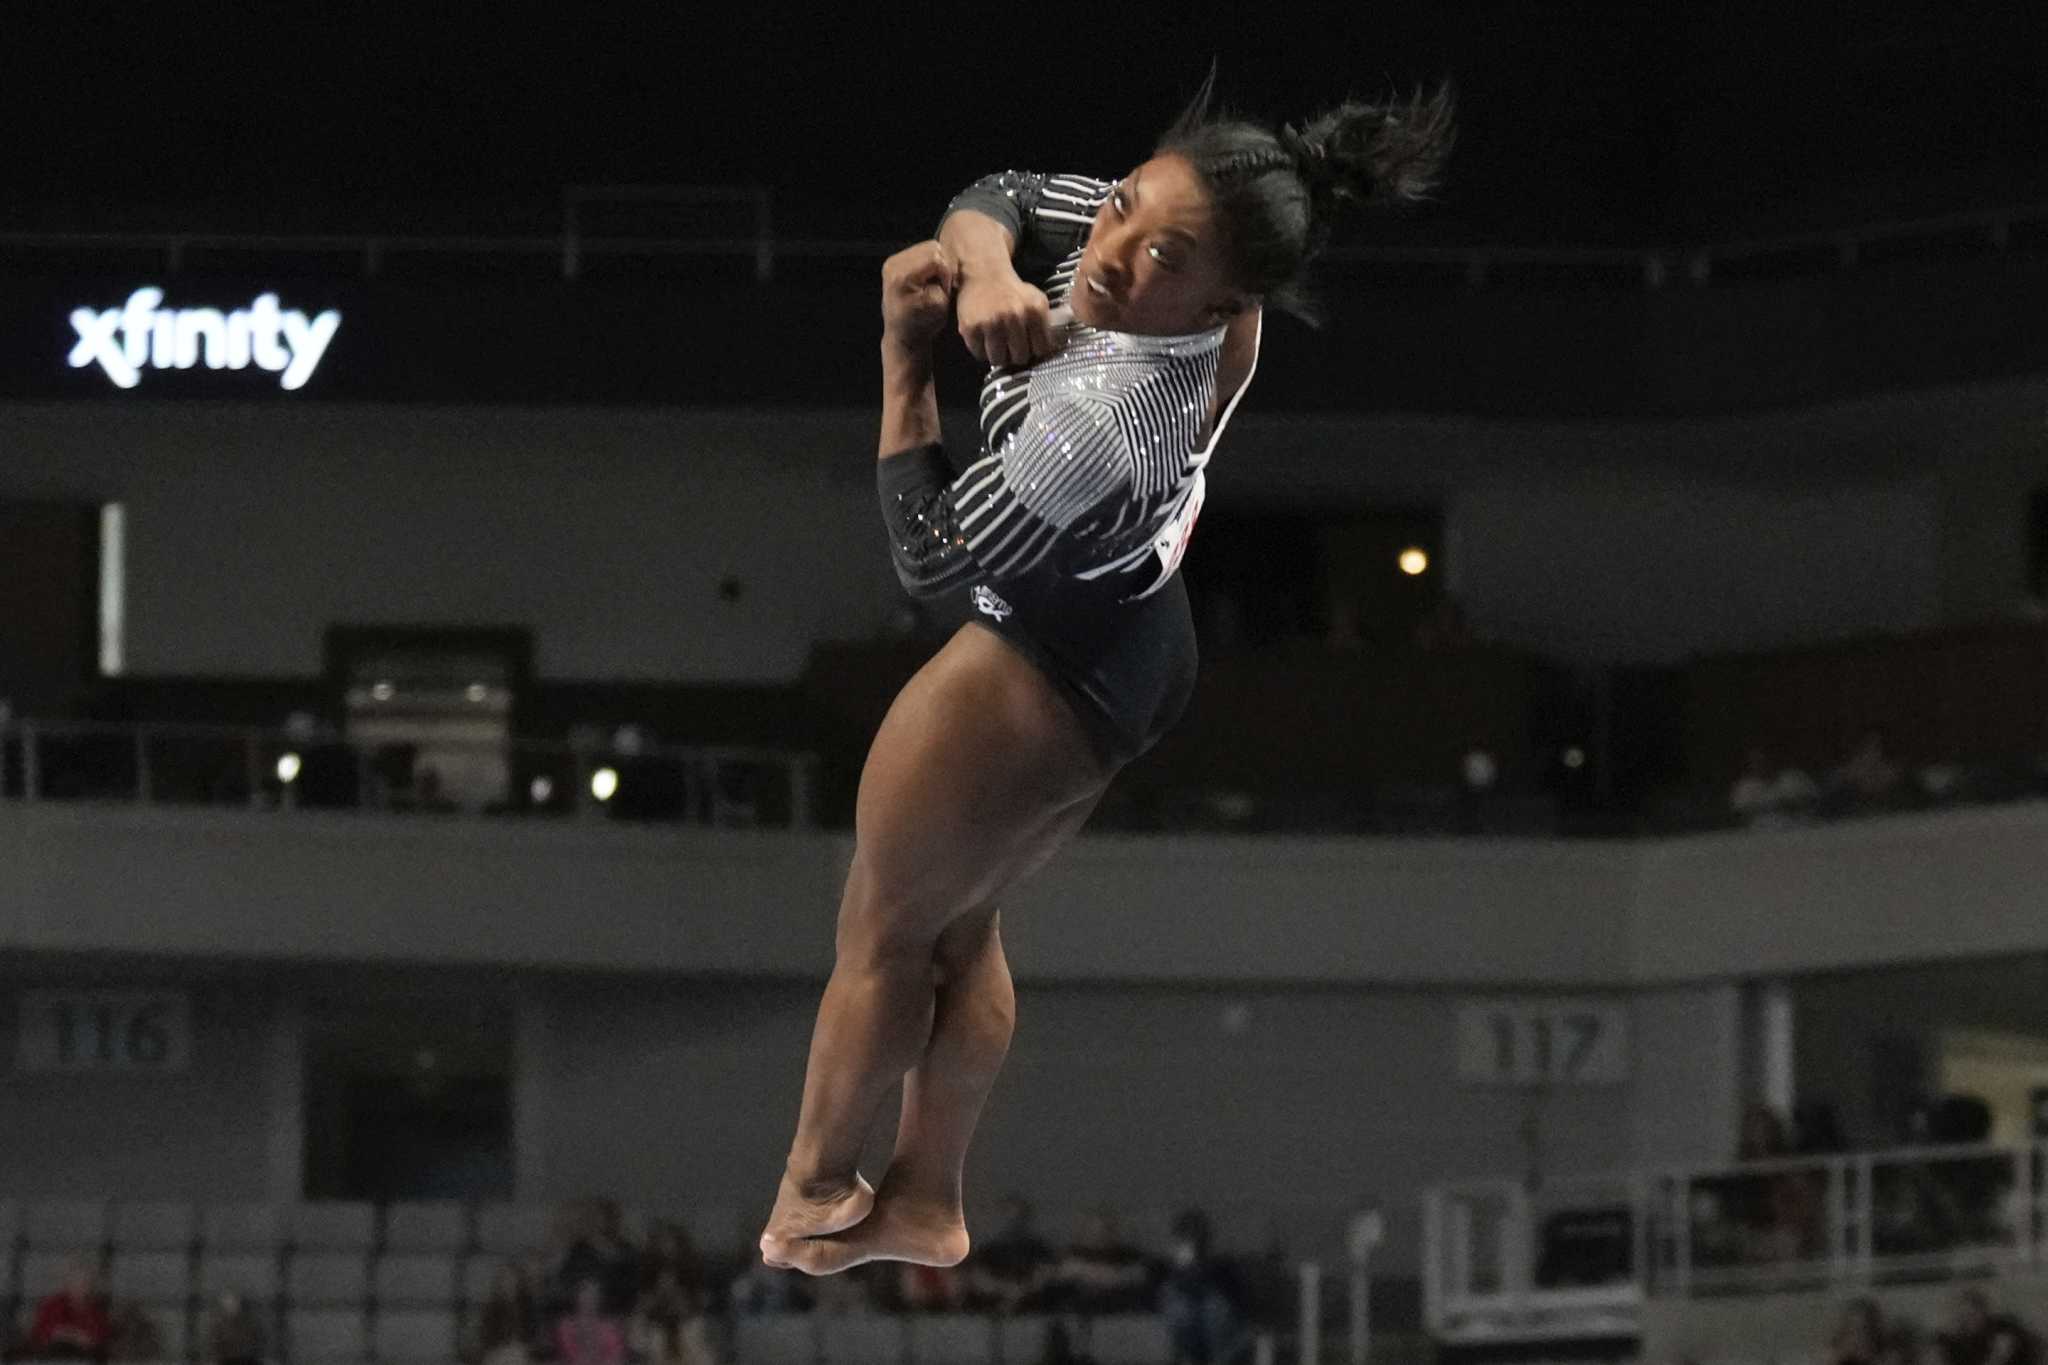 Simone Biles, looking perhaps better than ever, surges to early lead at US Championships